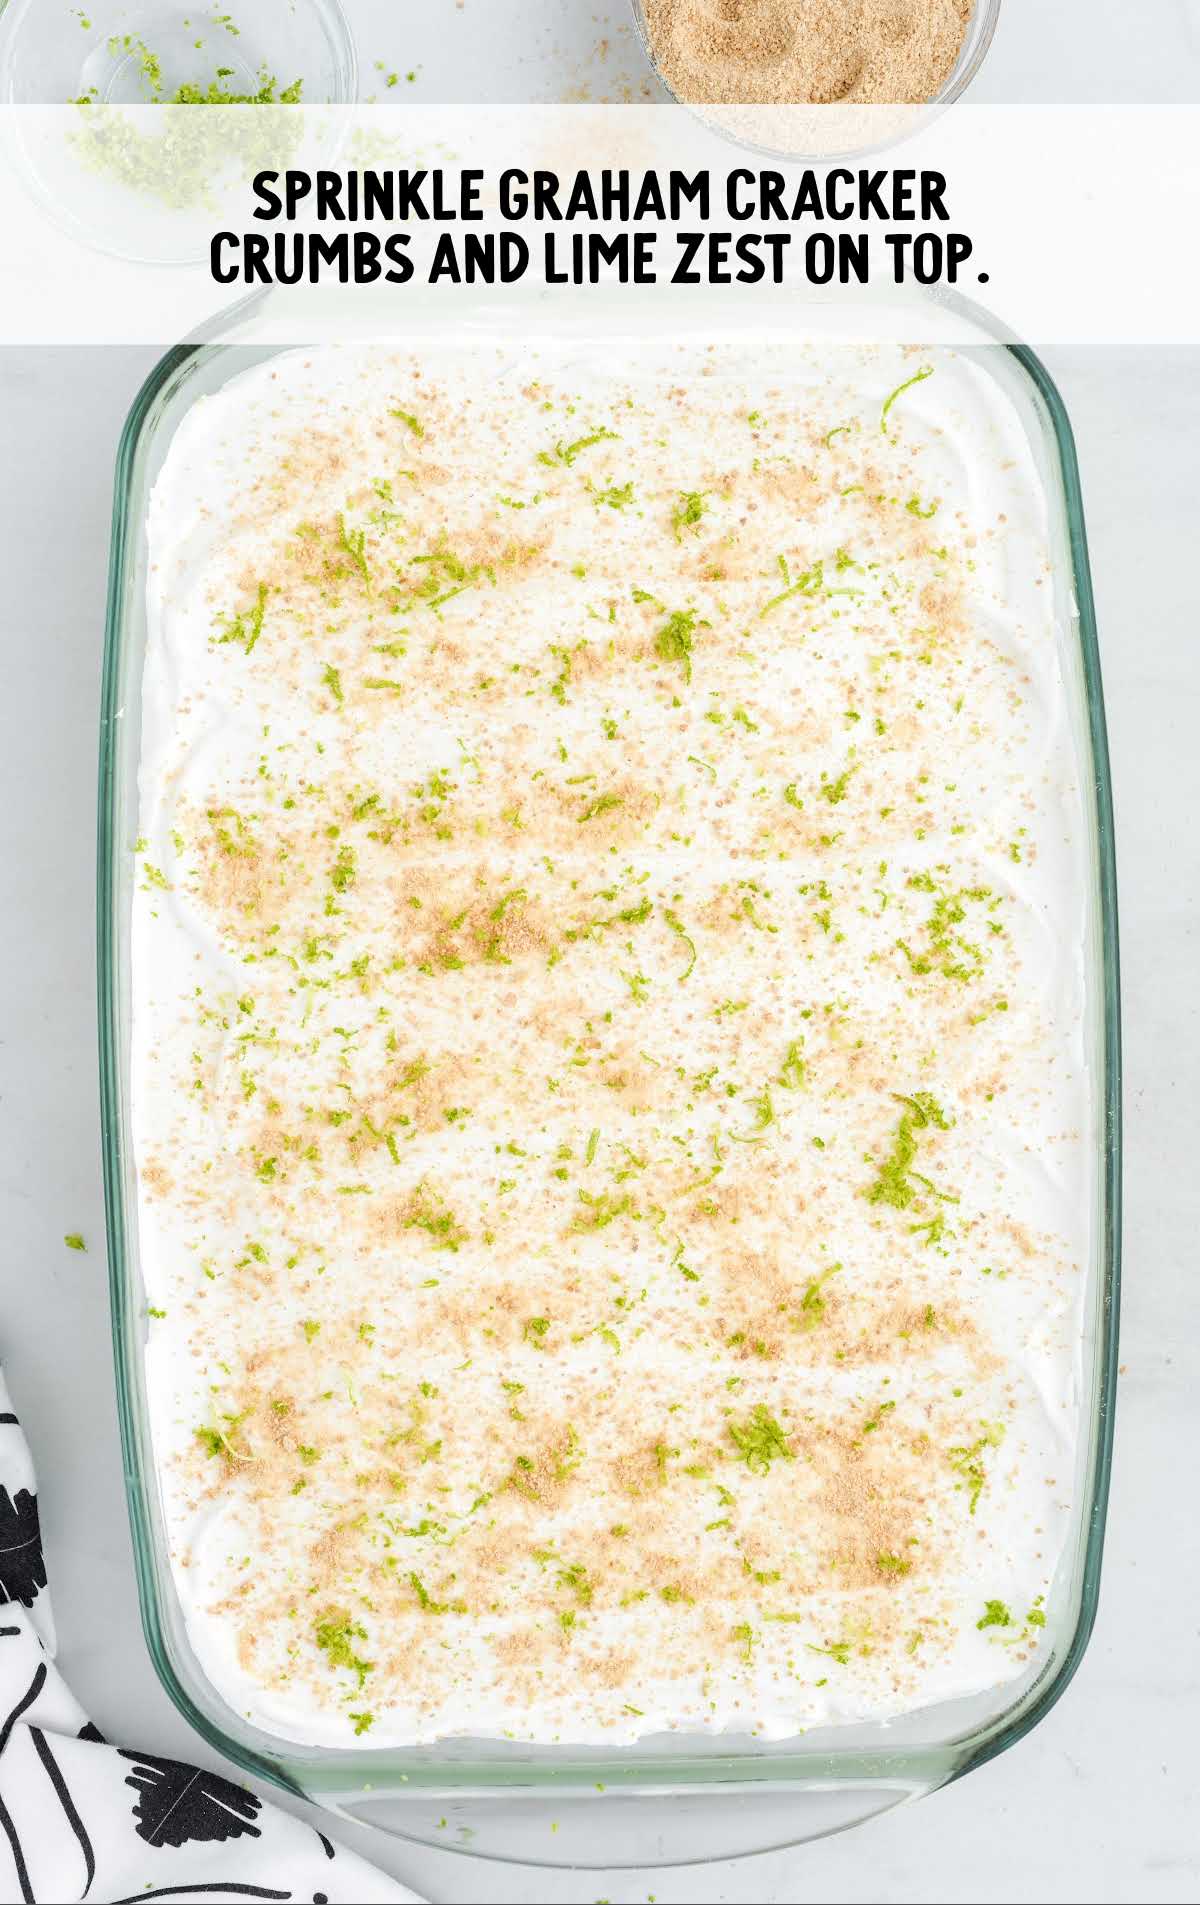 graham crackers and lime zest sprinkled on top of the pie in a baking dish